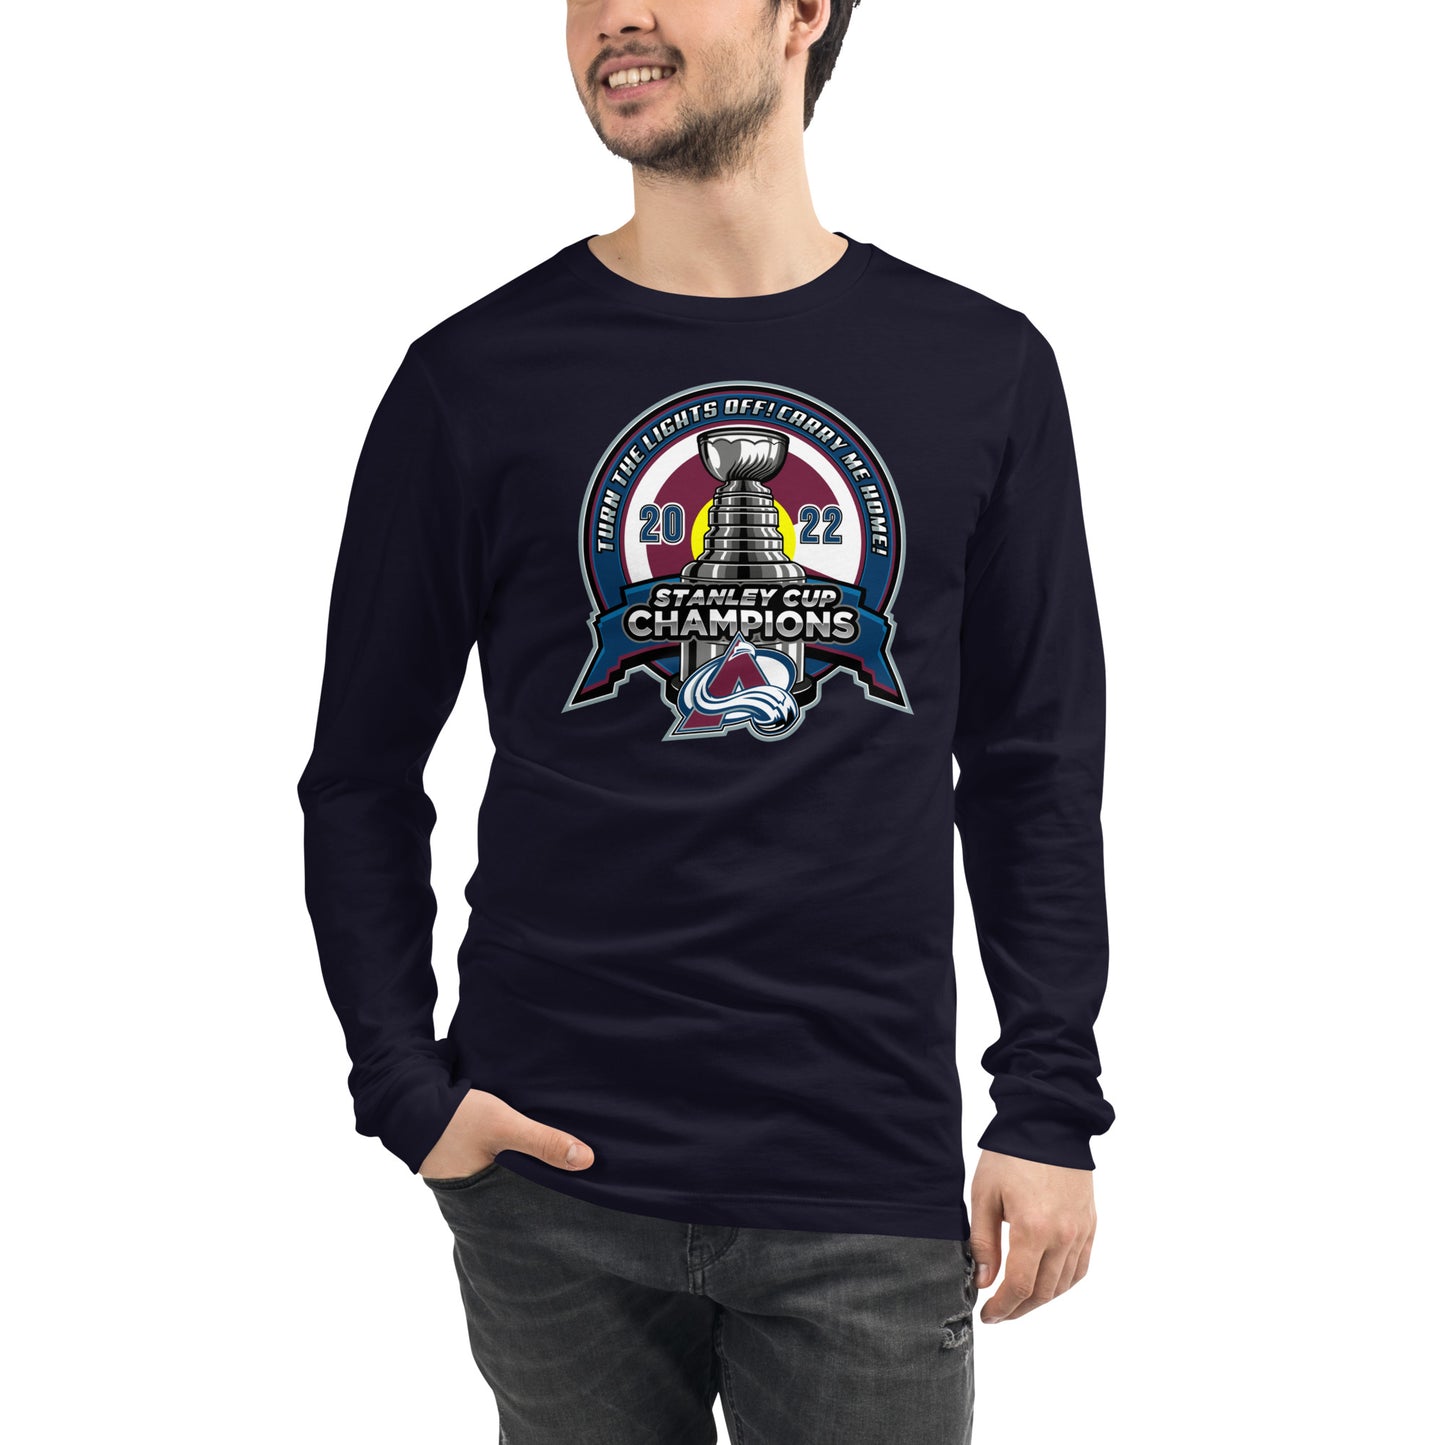 Turn The Lights Off, Carry Me Home Champs Long Sleeve Tee